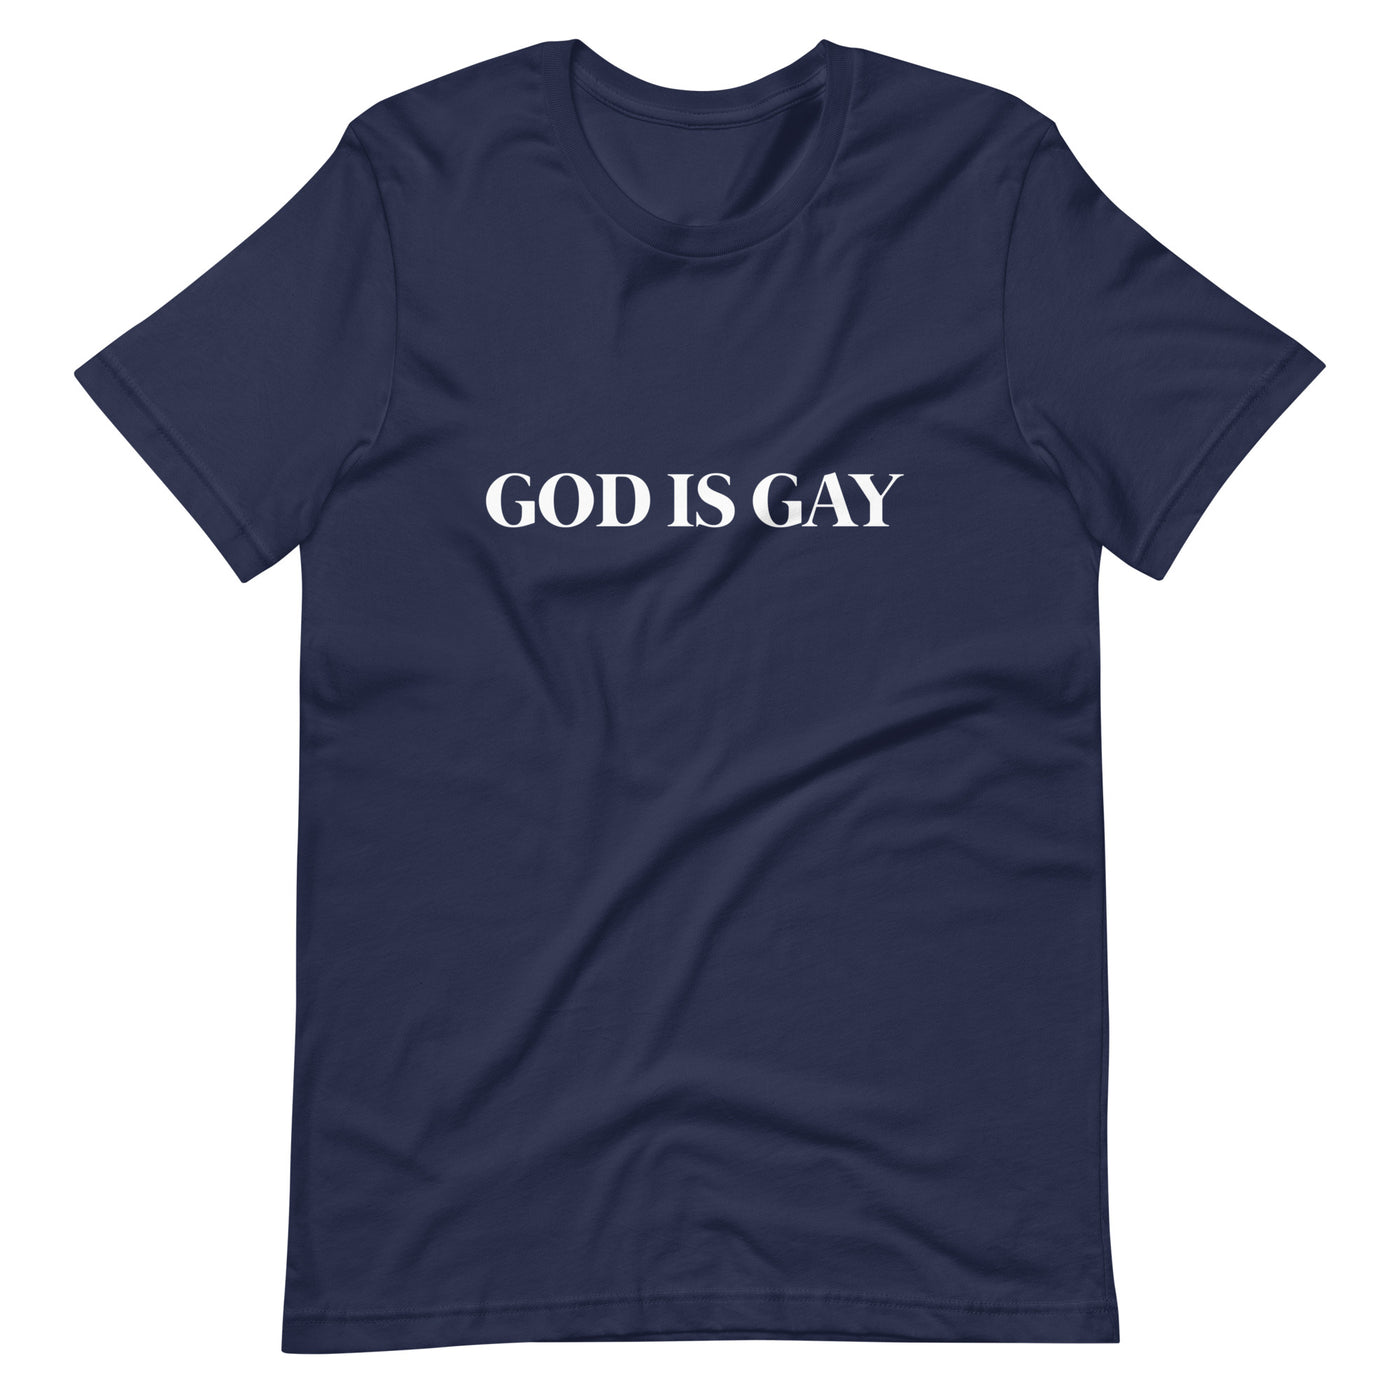 Pride Clothes - God Is Love & God Is Gay Proud Ally T Shirt - Navy